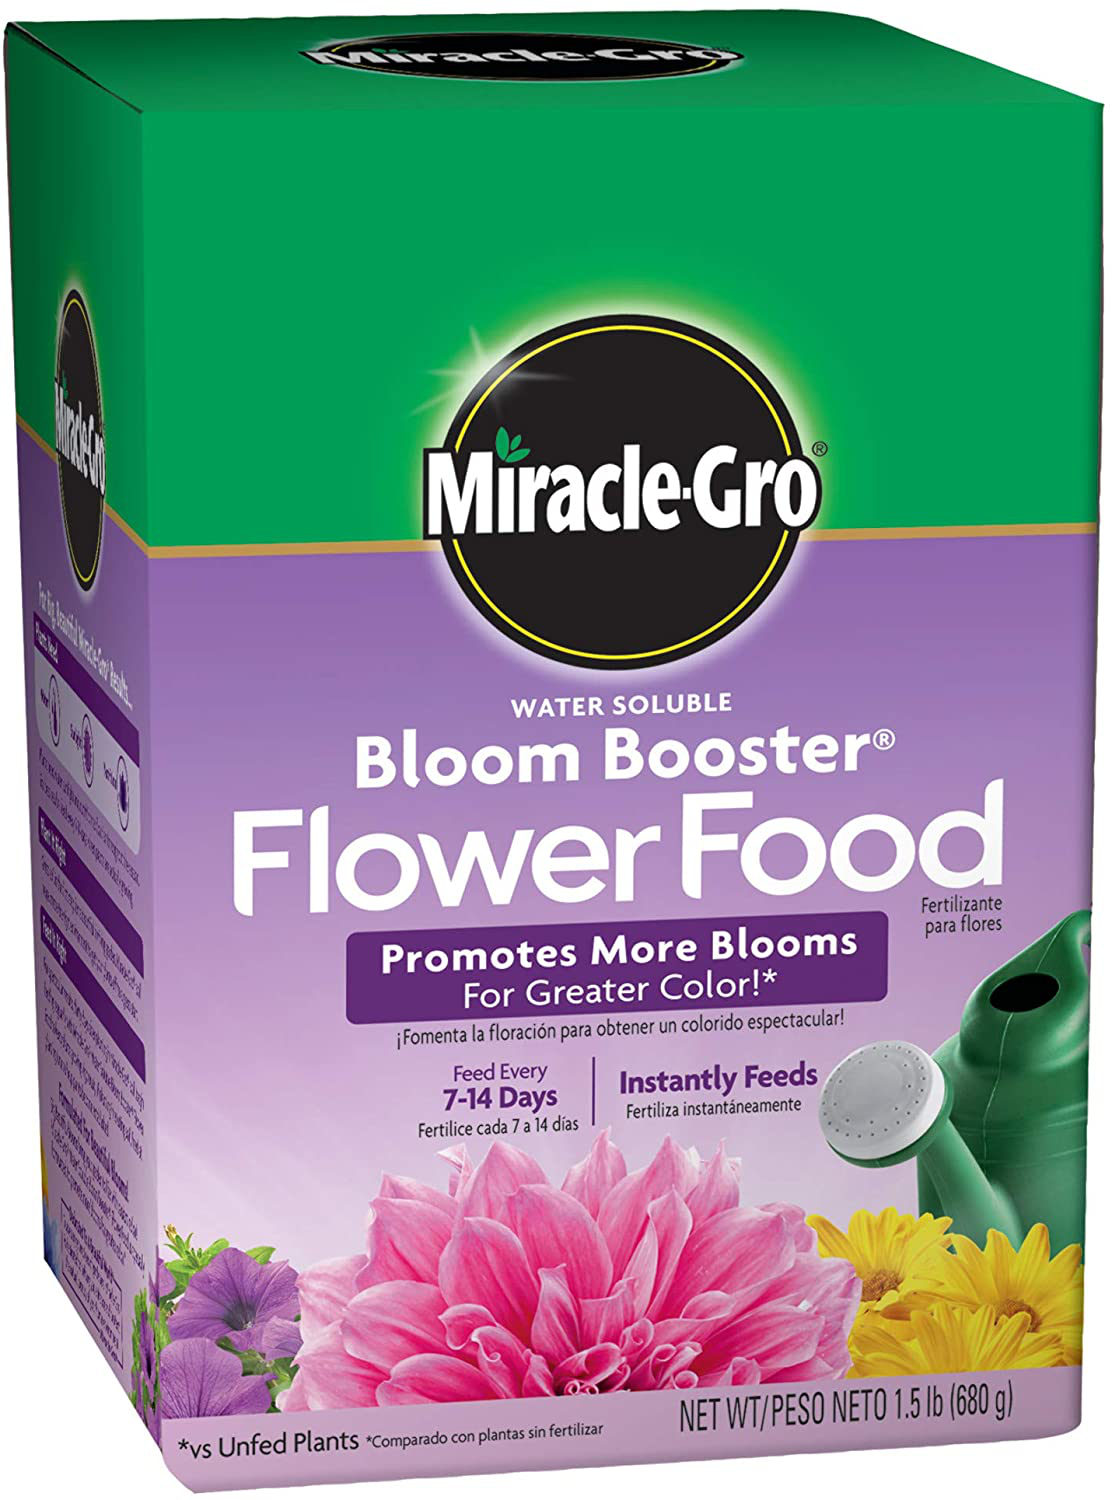 Miracle-Gro Water Soluble All Purpose Plant Food, 8 Oz.